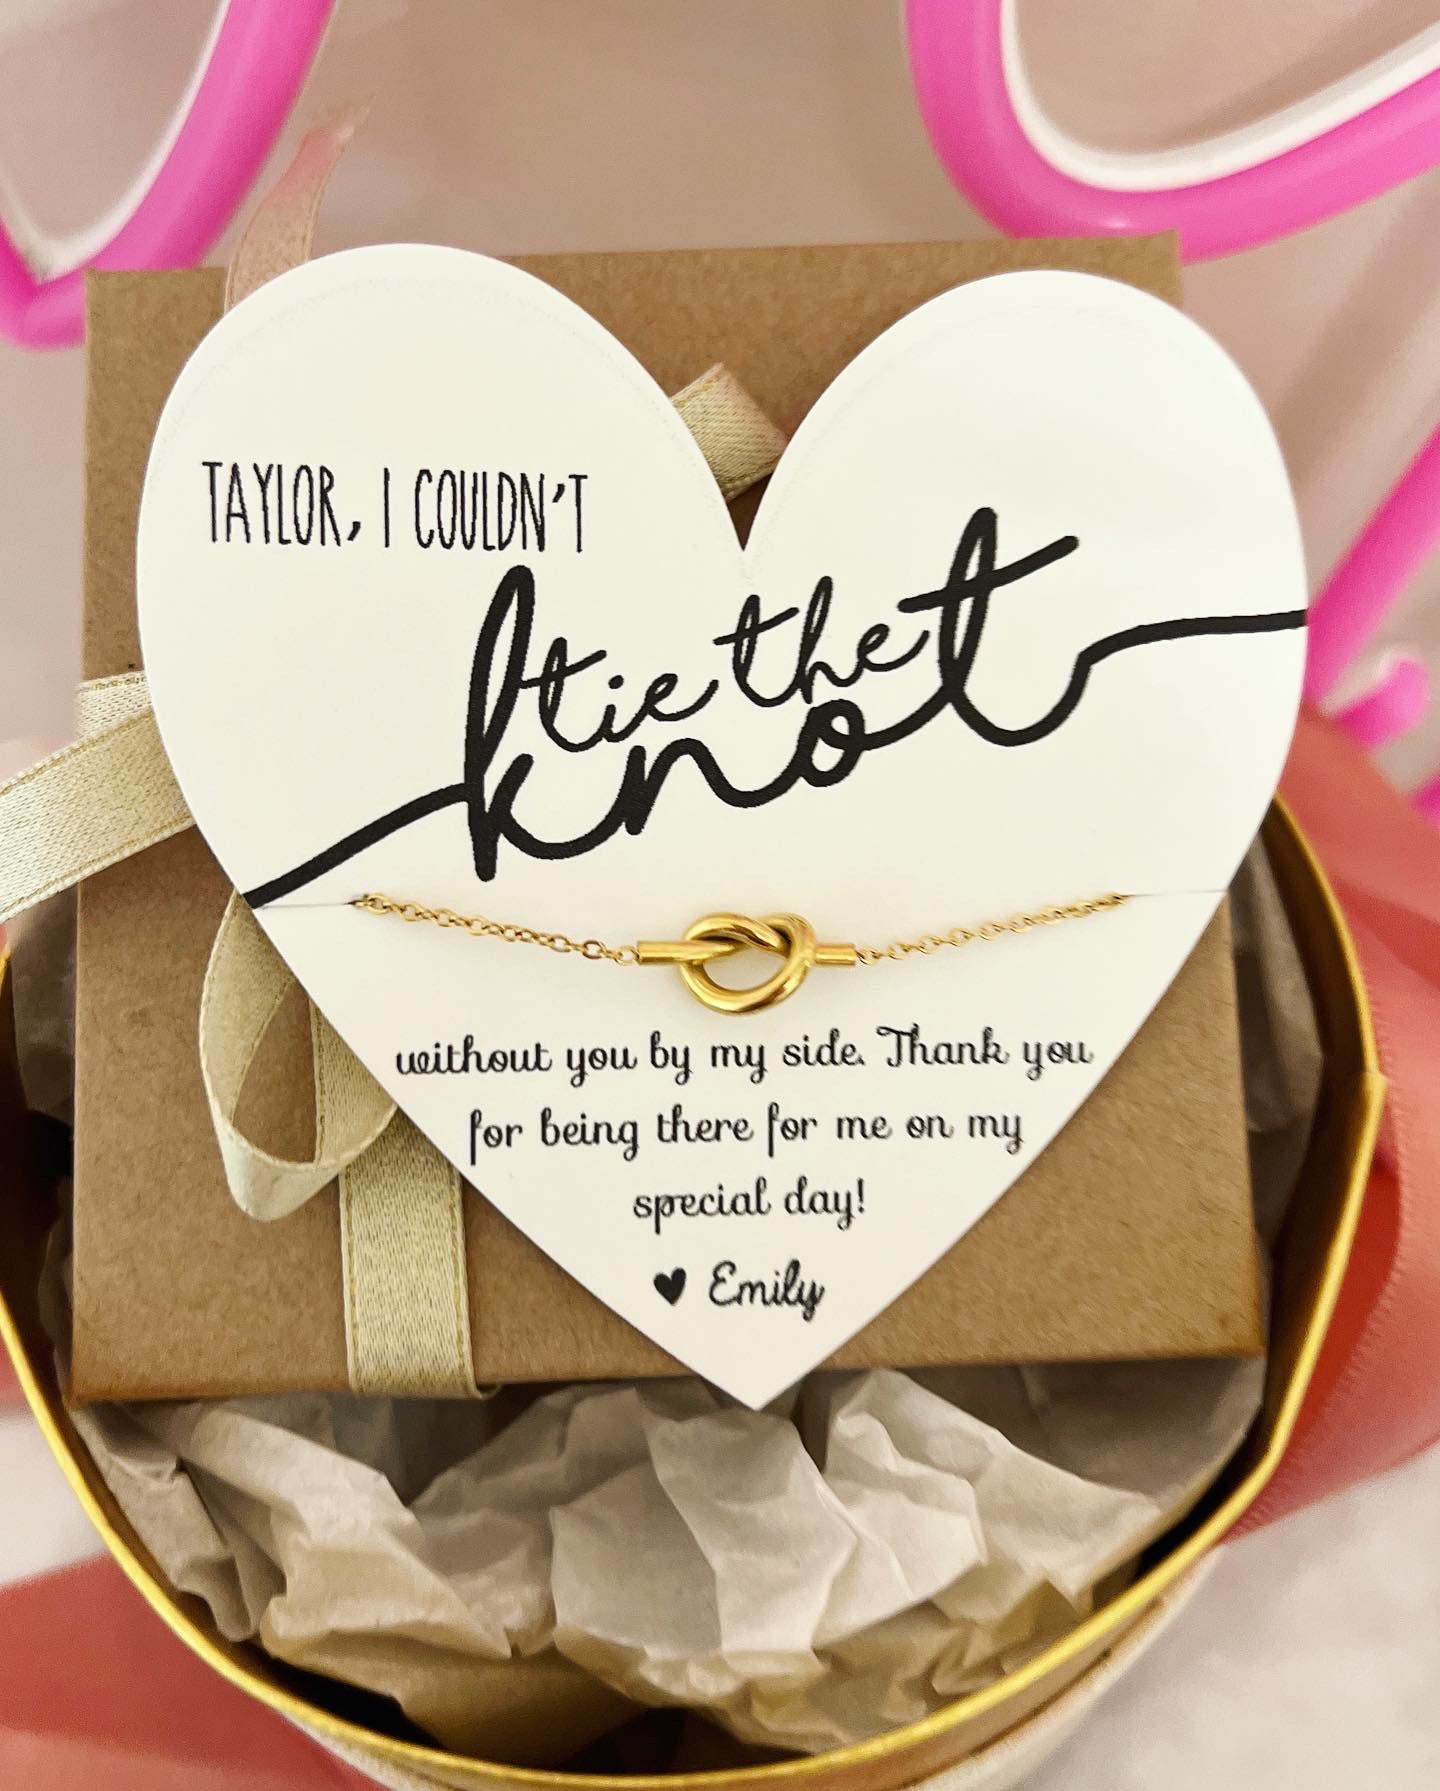 Tie the knot necklace, thank you for helping me tie the knot! Bridal party necklace!